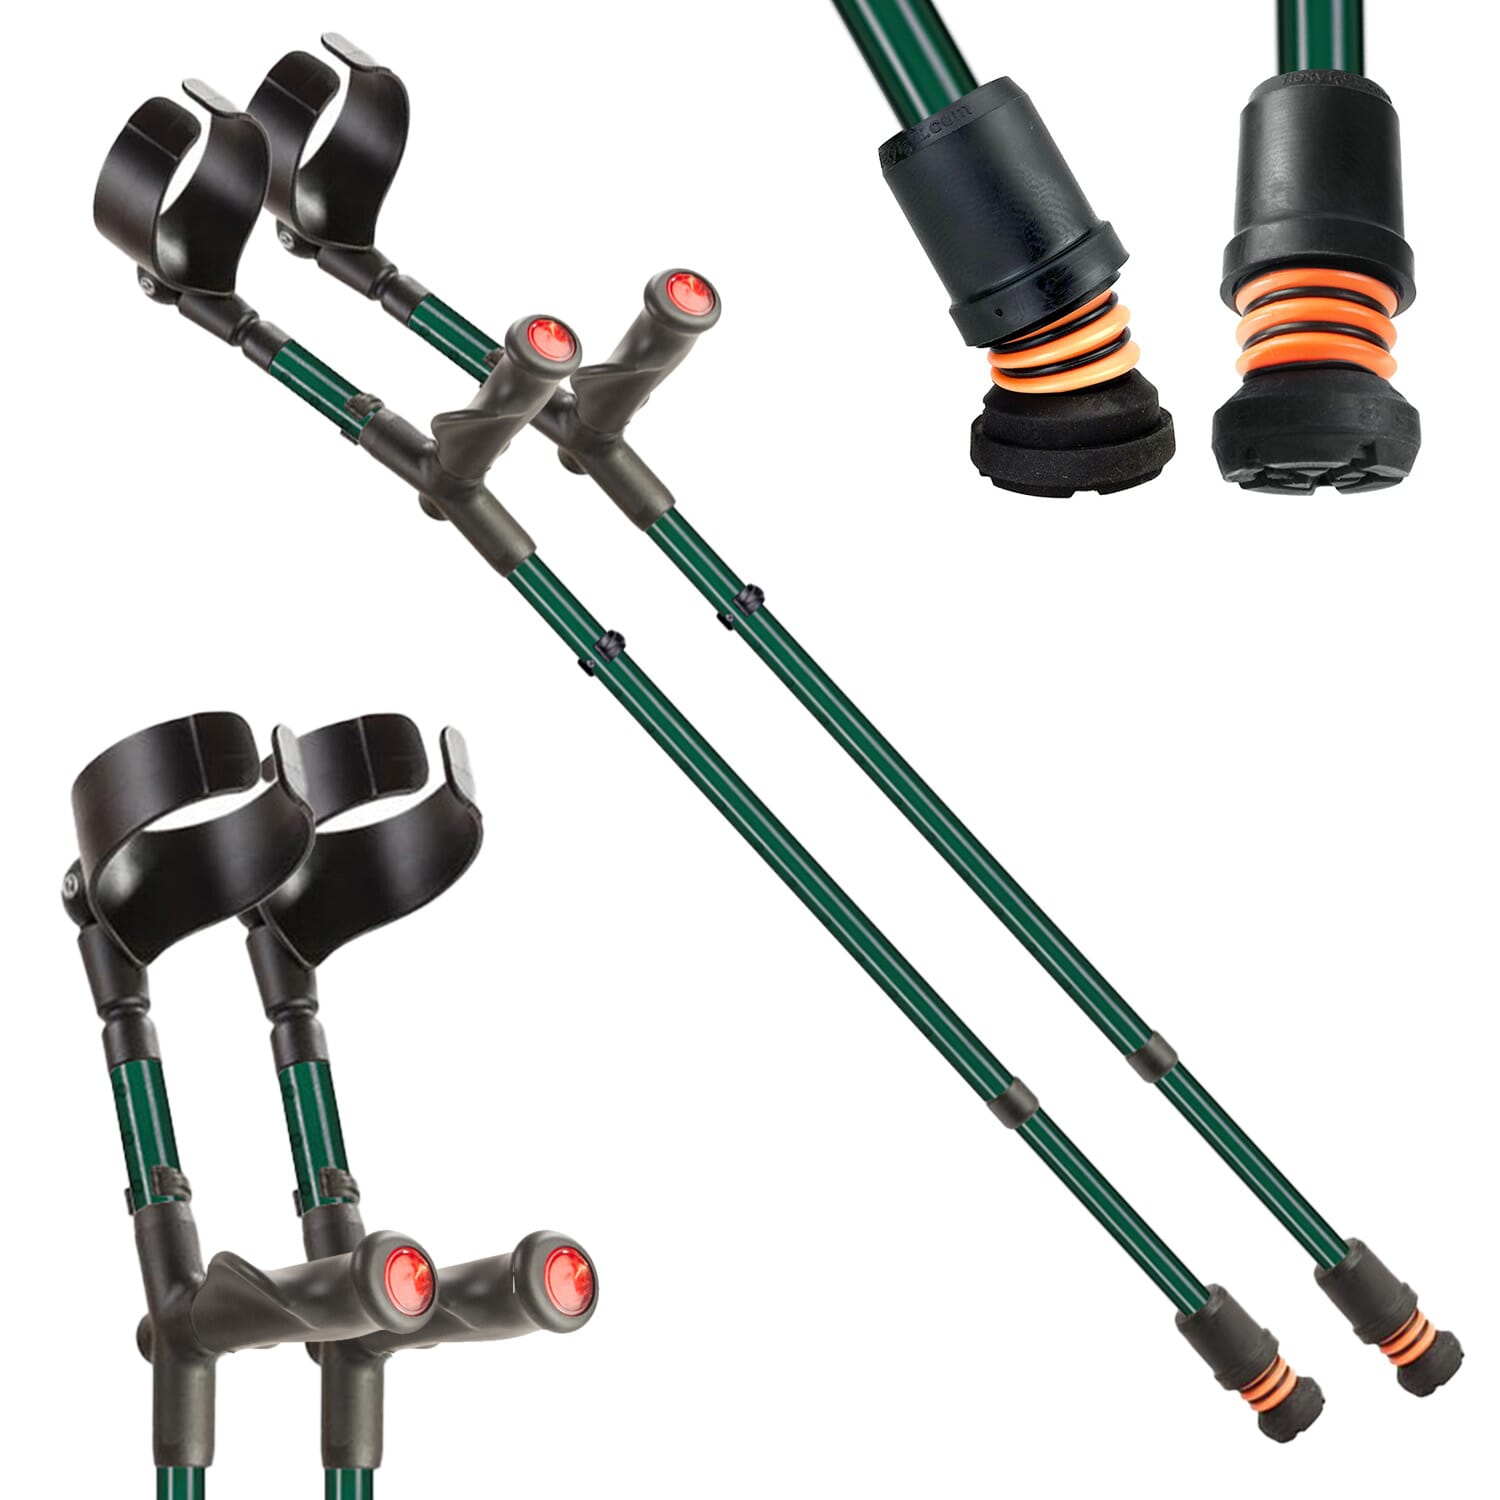 View Flexyfoot Comfort Grip Double Adjustable Crutches British Racing Green Pair information